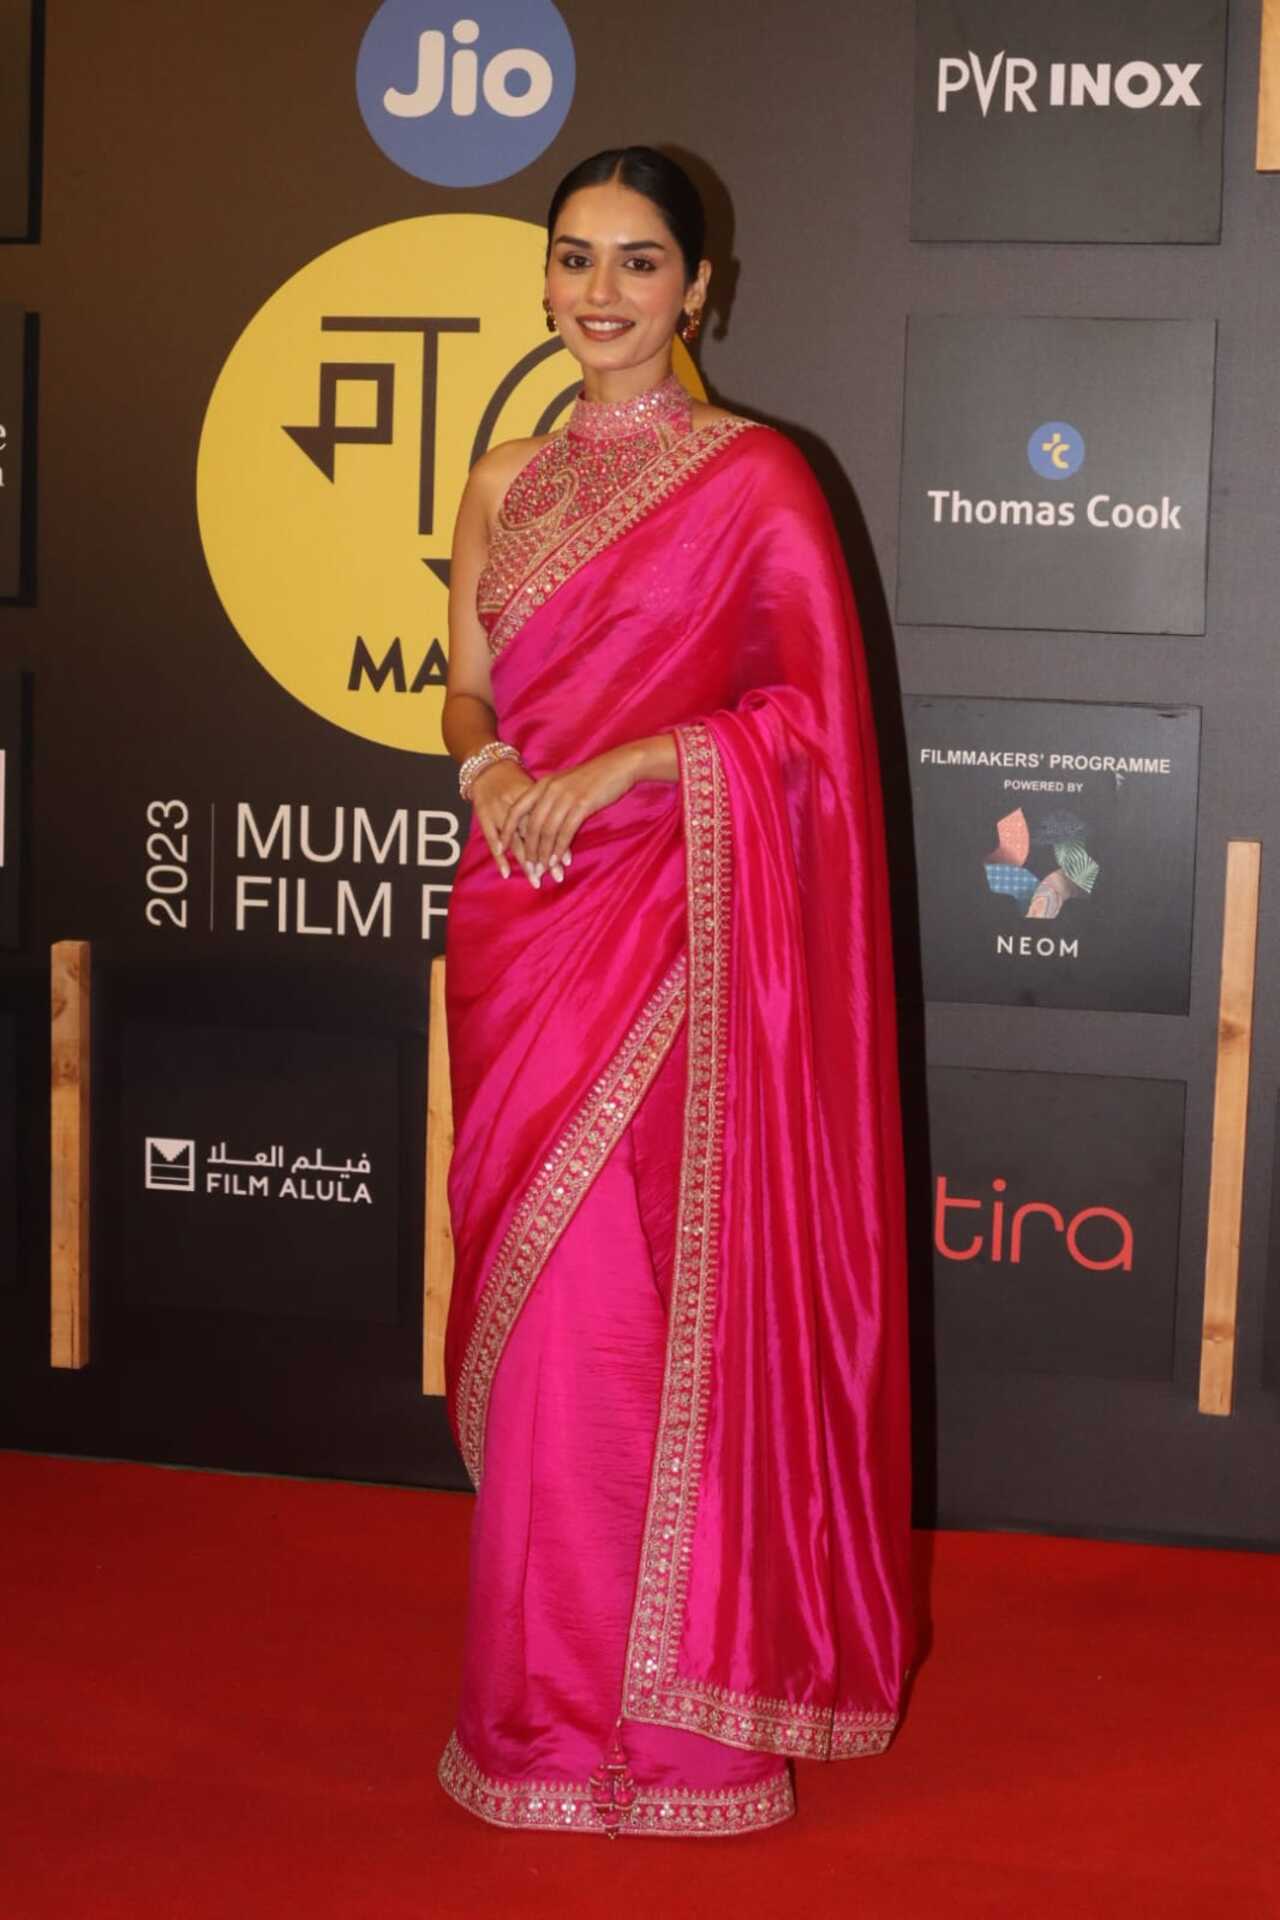 Manushi Chhillar looked absolutely stunning in this pink saree with matching jewellery